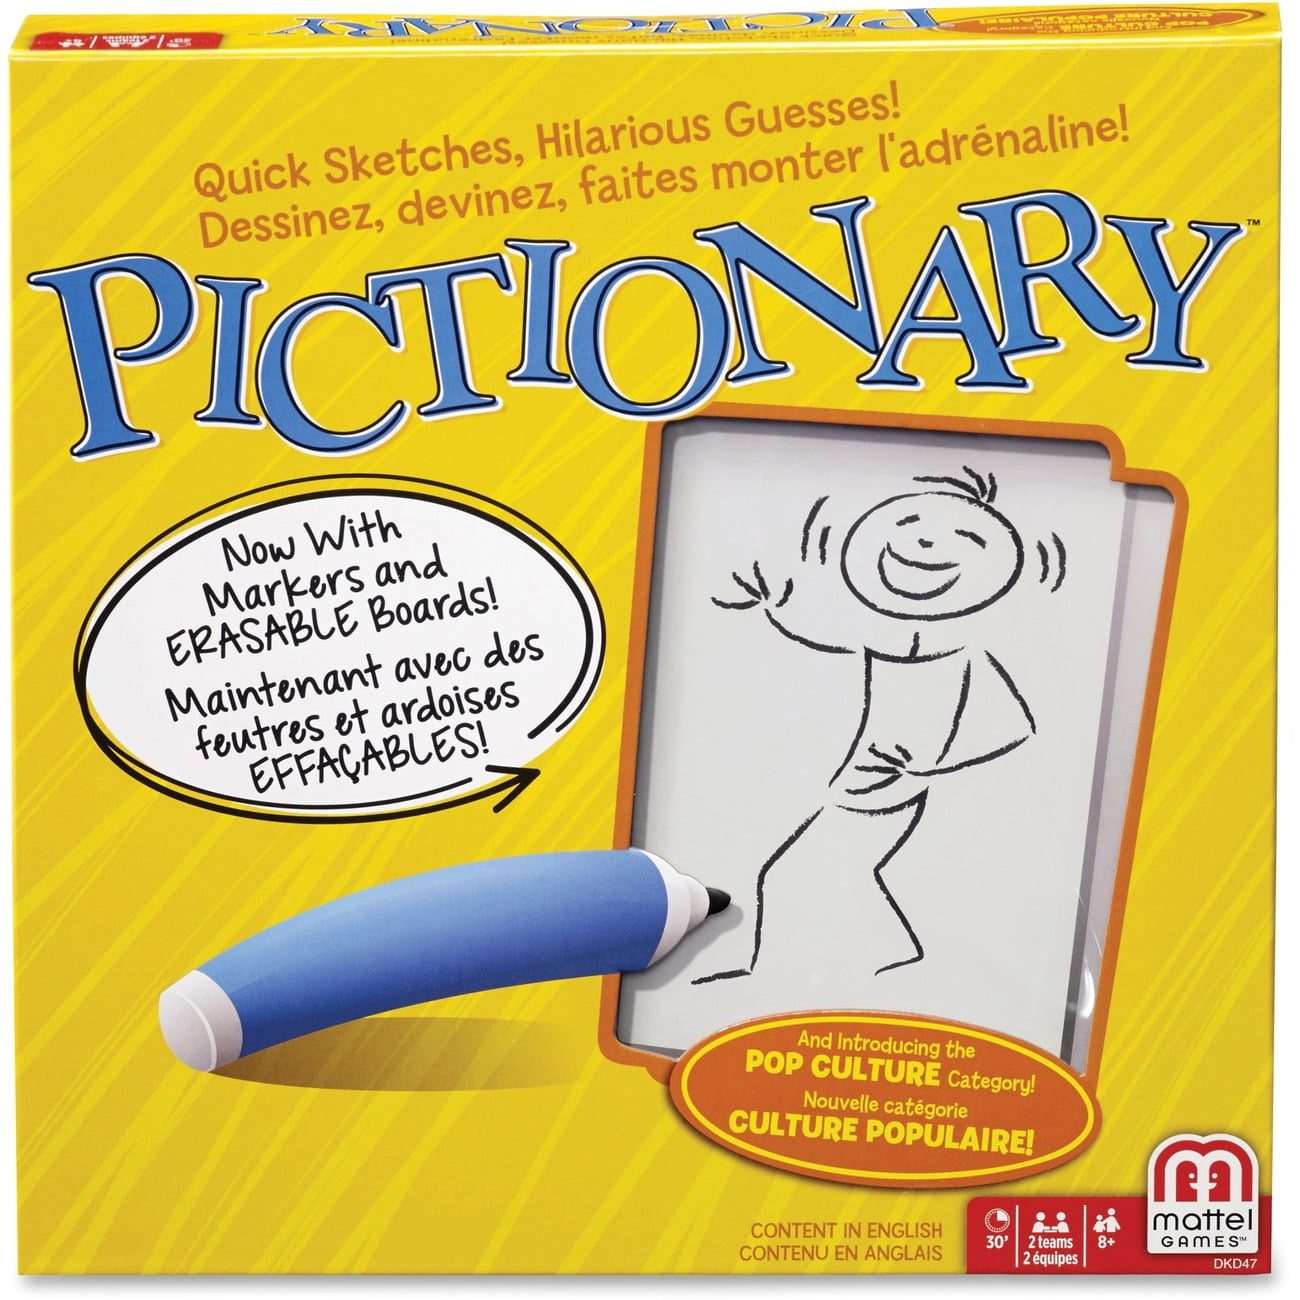 Pictionary 2013 Quick Sketches Family Board Game Mattel for sale online 